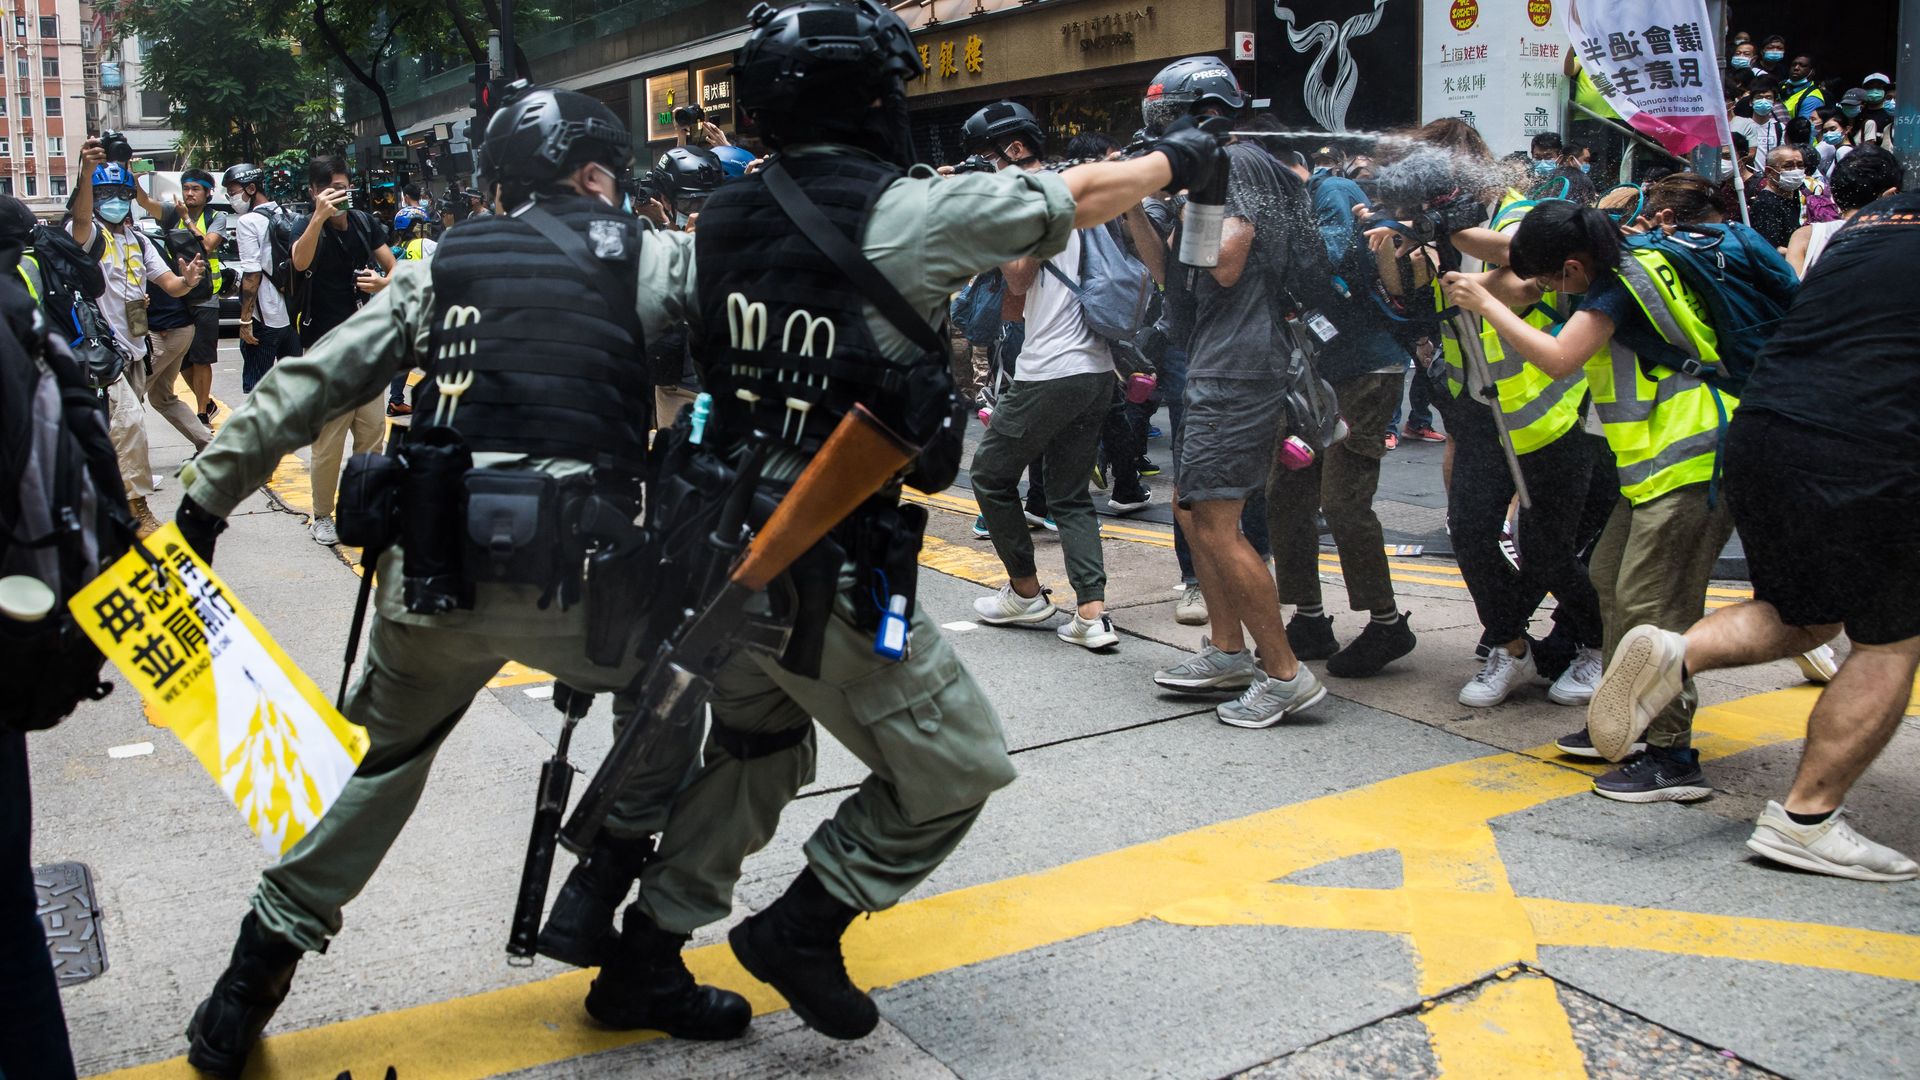 Riot police (L) deploy pepper spray toward journalists (R) as protesters gathered for a rally against a new national security law in Hong Kong